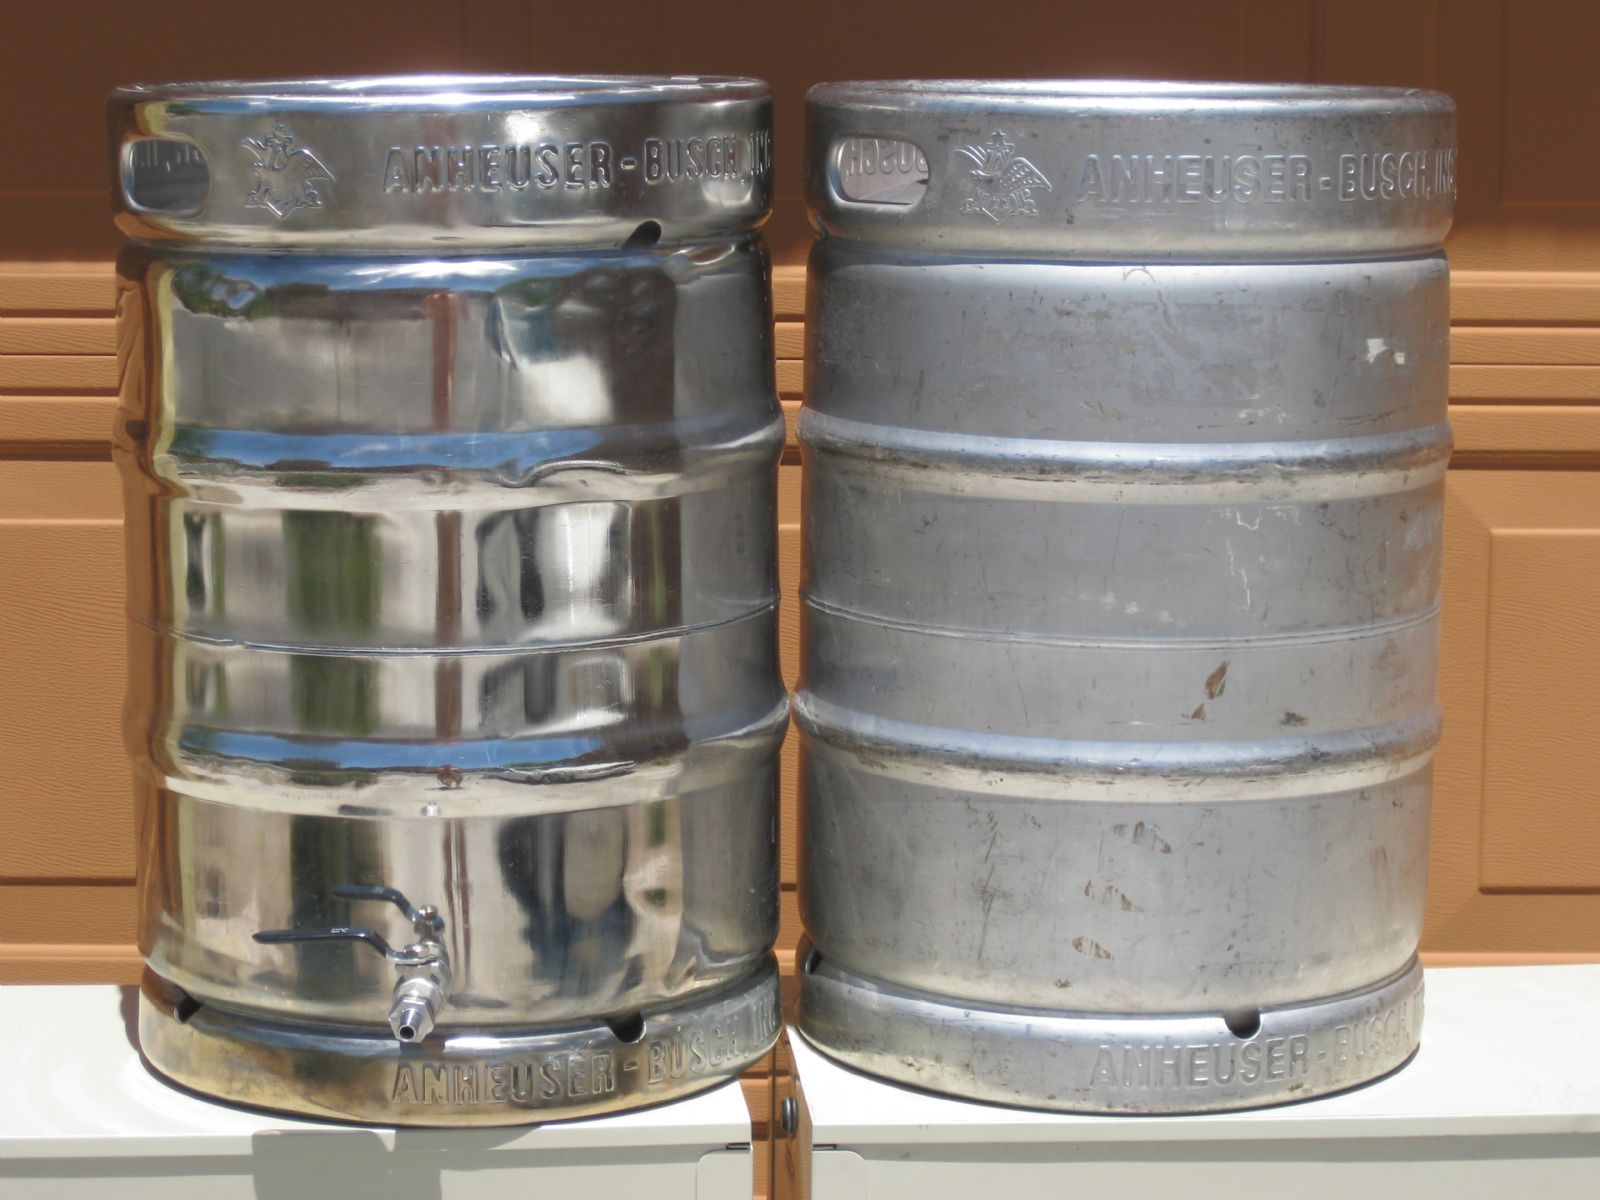 Polished Keg Before and After